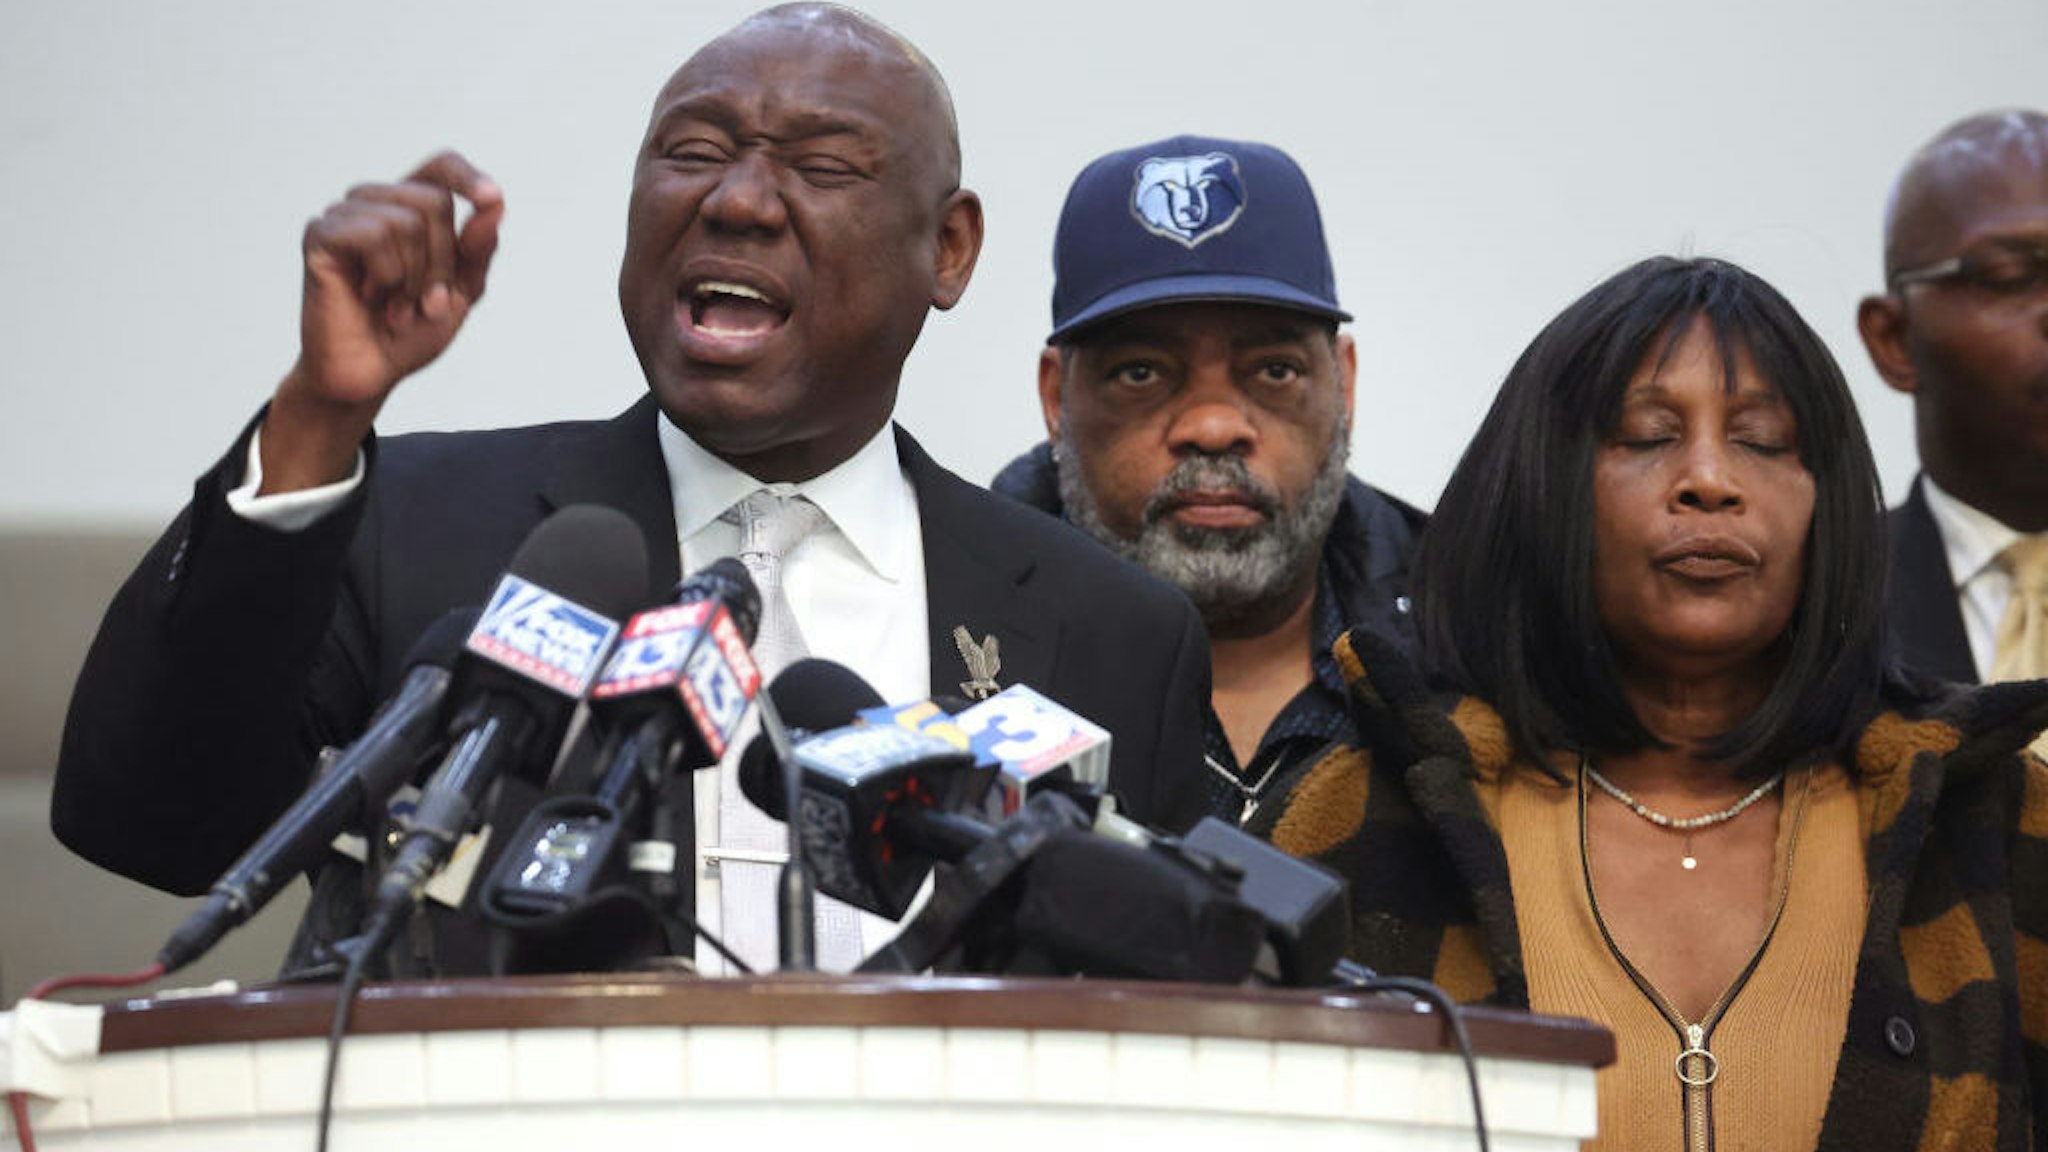 MEMPHIS, TENNESSEE - JANUARY 27: Flanked by Rodney Wells (C) and RowVaughn Wells, the stepfather and mother of Tyre Nichols, civil rights attorney Ben Crump speaks during a press conference on January 27, 2023 in Memphis, Tennessee. Tyre Nichols, a 29-year-old Black man, died three days after being severely beaten by five Memphis Police Department officers during a traffic stop on January 7, 2023. Memphis and cities across the country are bracing for potential unrest when the city releases video footage from the beating to the public later this evening. (Photo by Scott Olson/Getty Images)